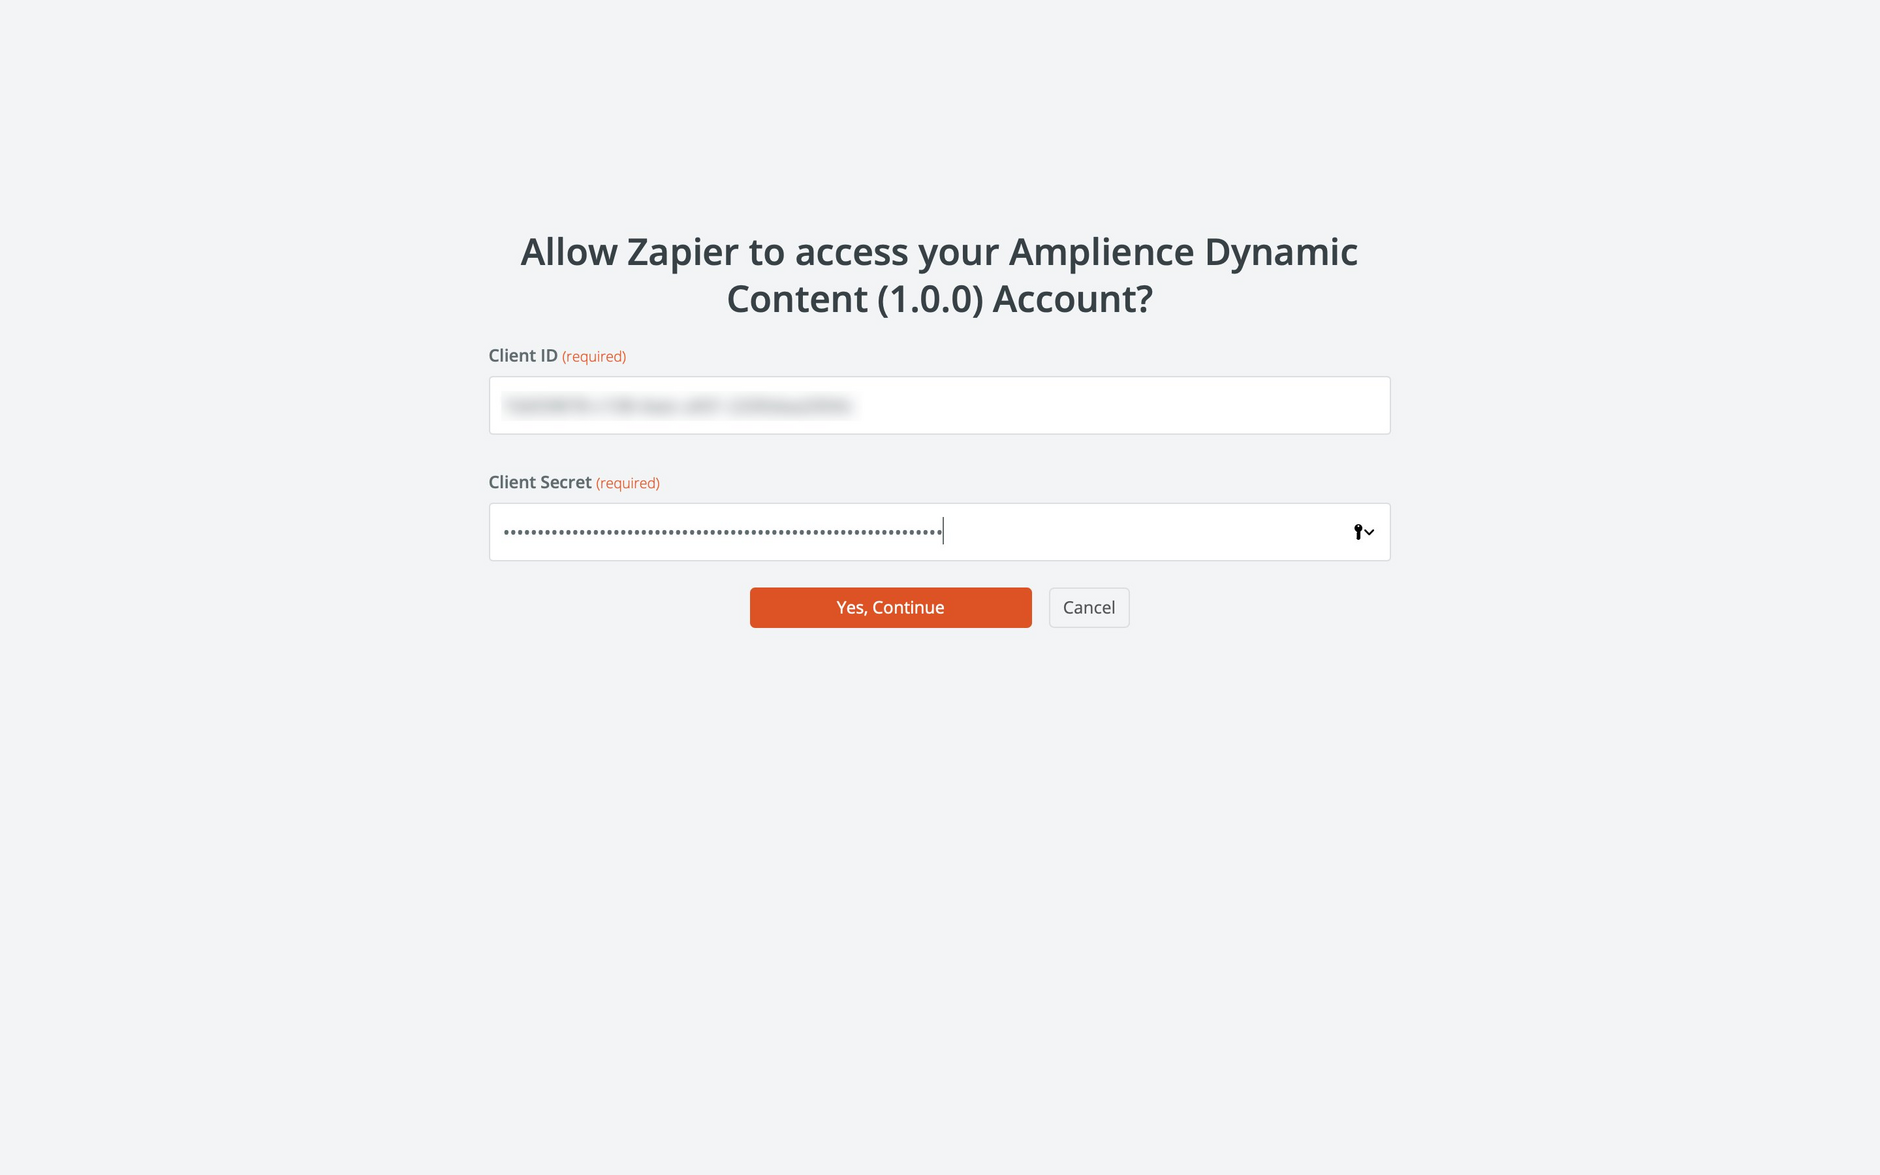 You need to enter your Dynamic Content client ID and secret to connect Zapier